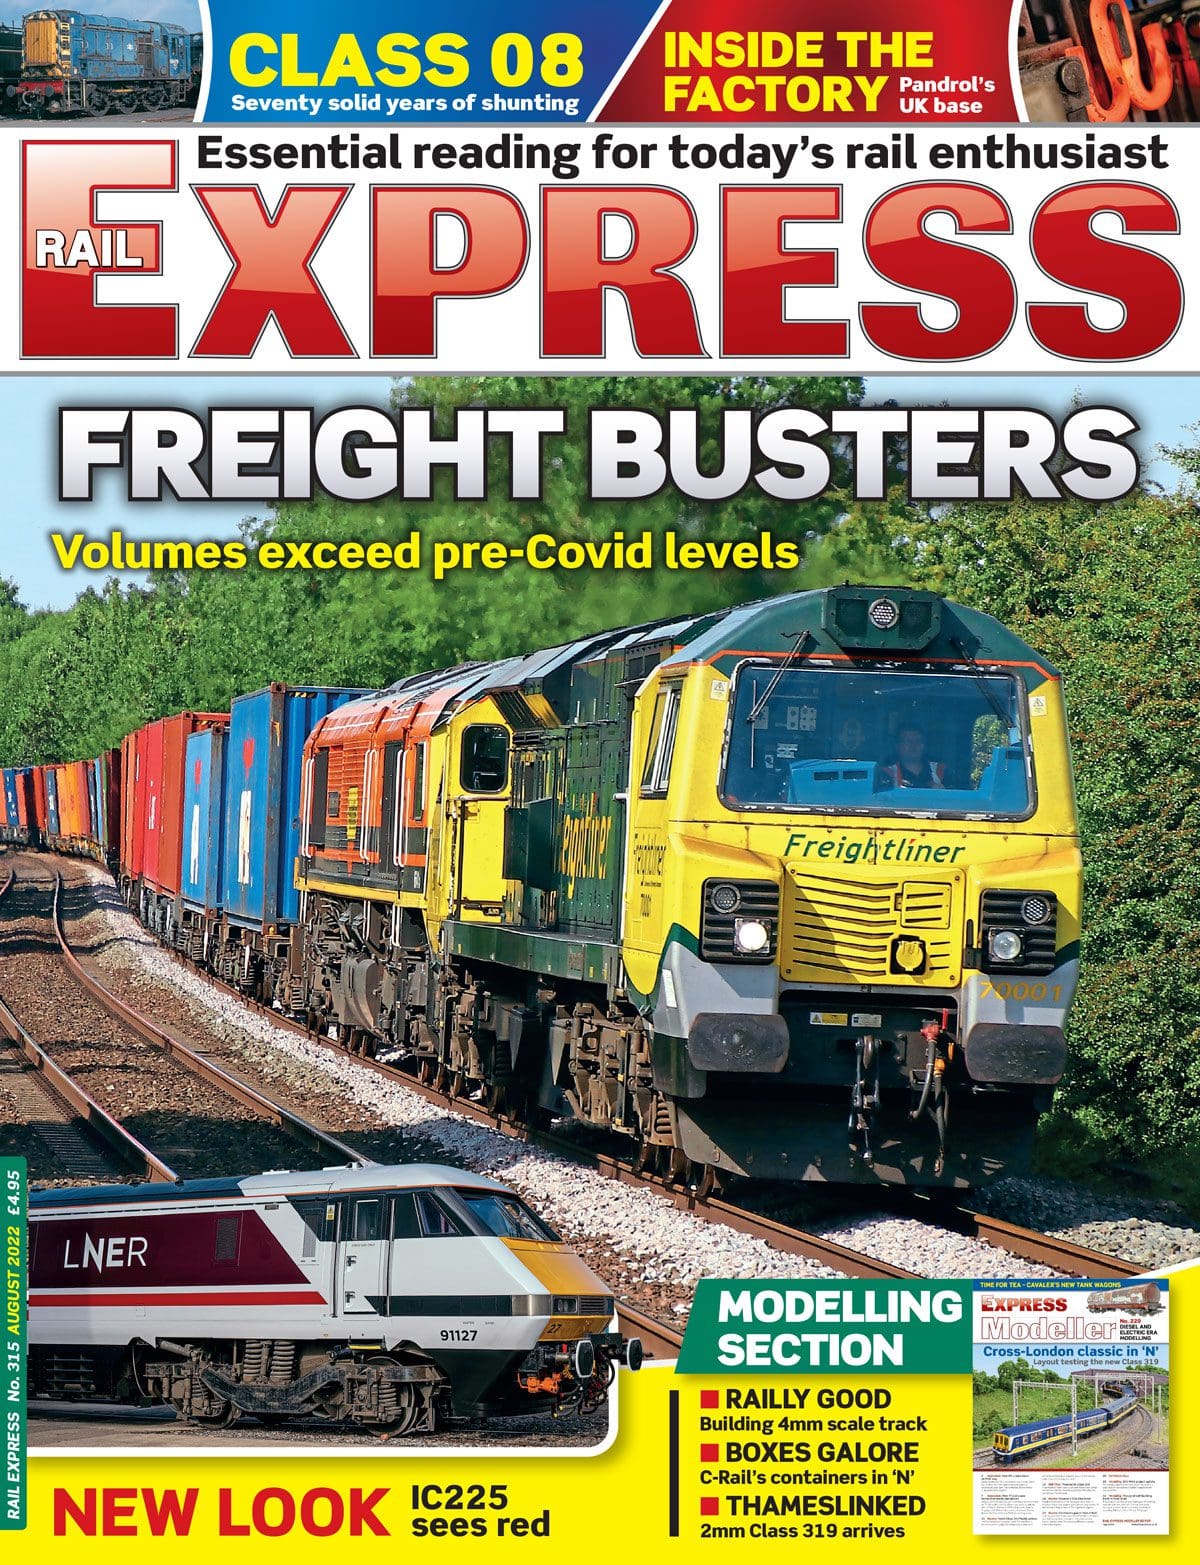 Front cover of Rail Express August issue